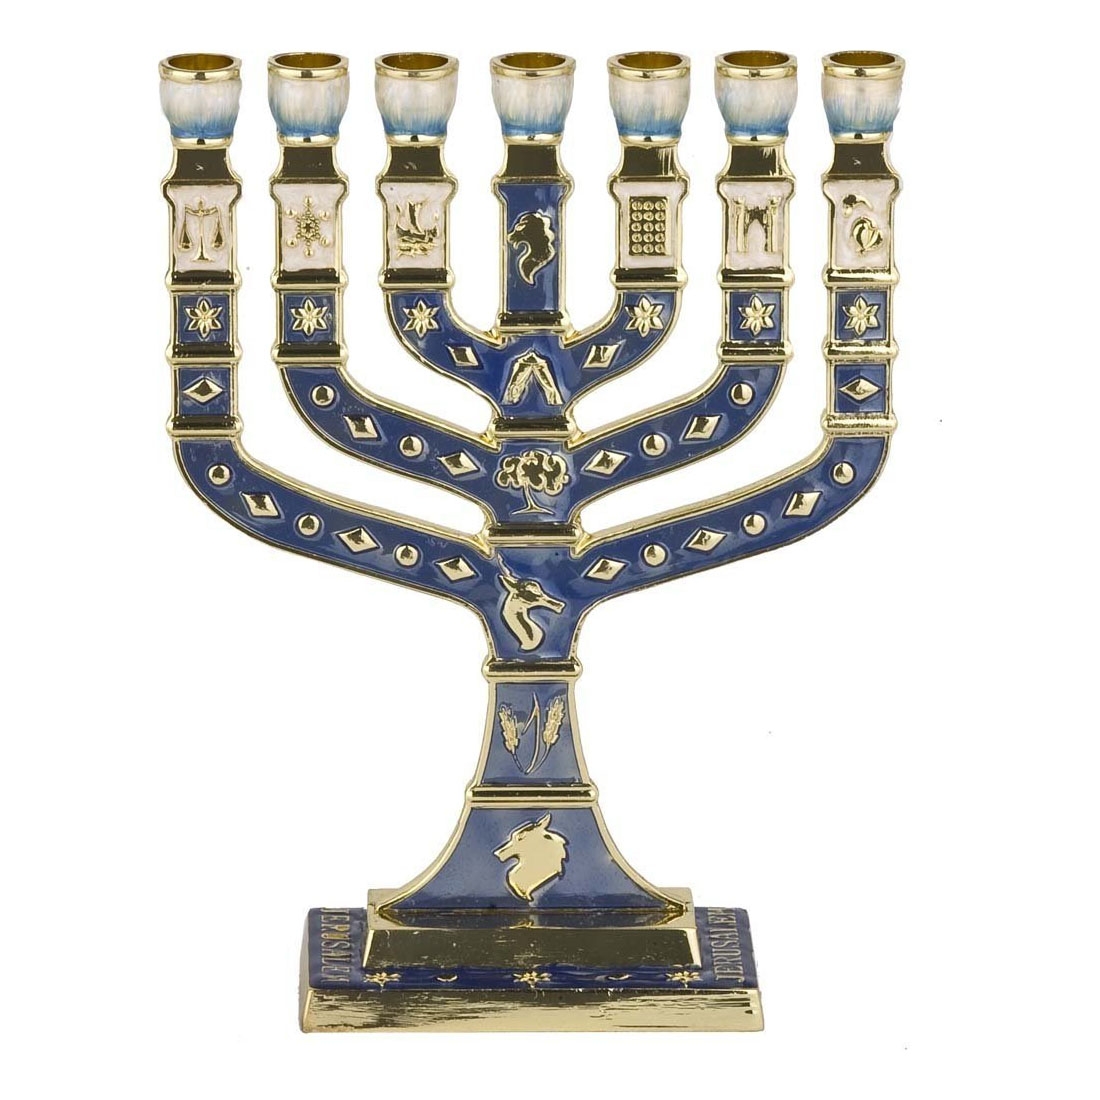 Blue Knesset with Jerusalem and 12 Tribes 7-Branched Enamel Menorah  - 1